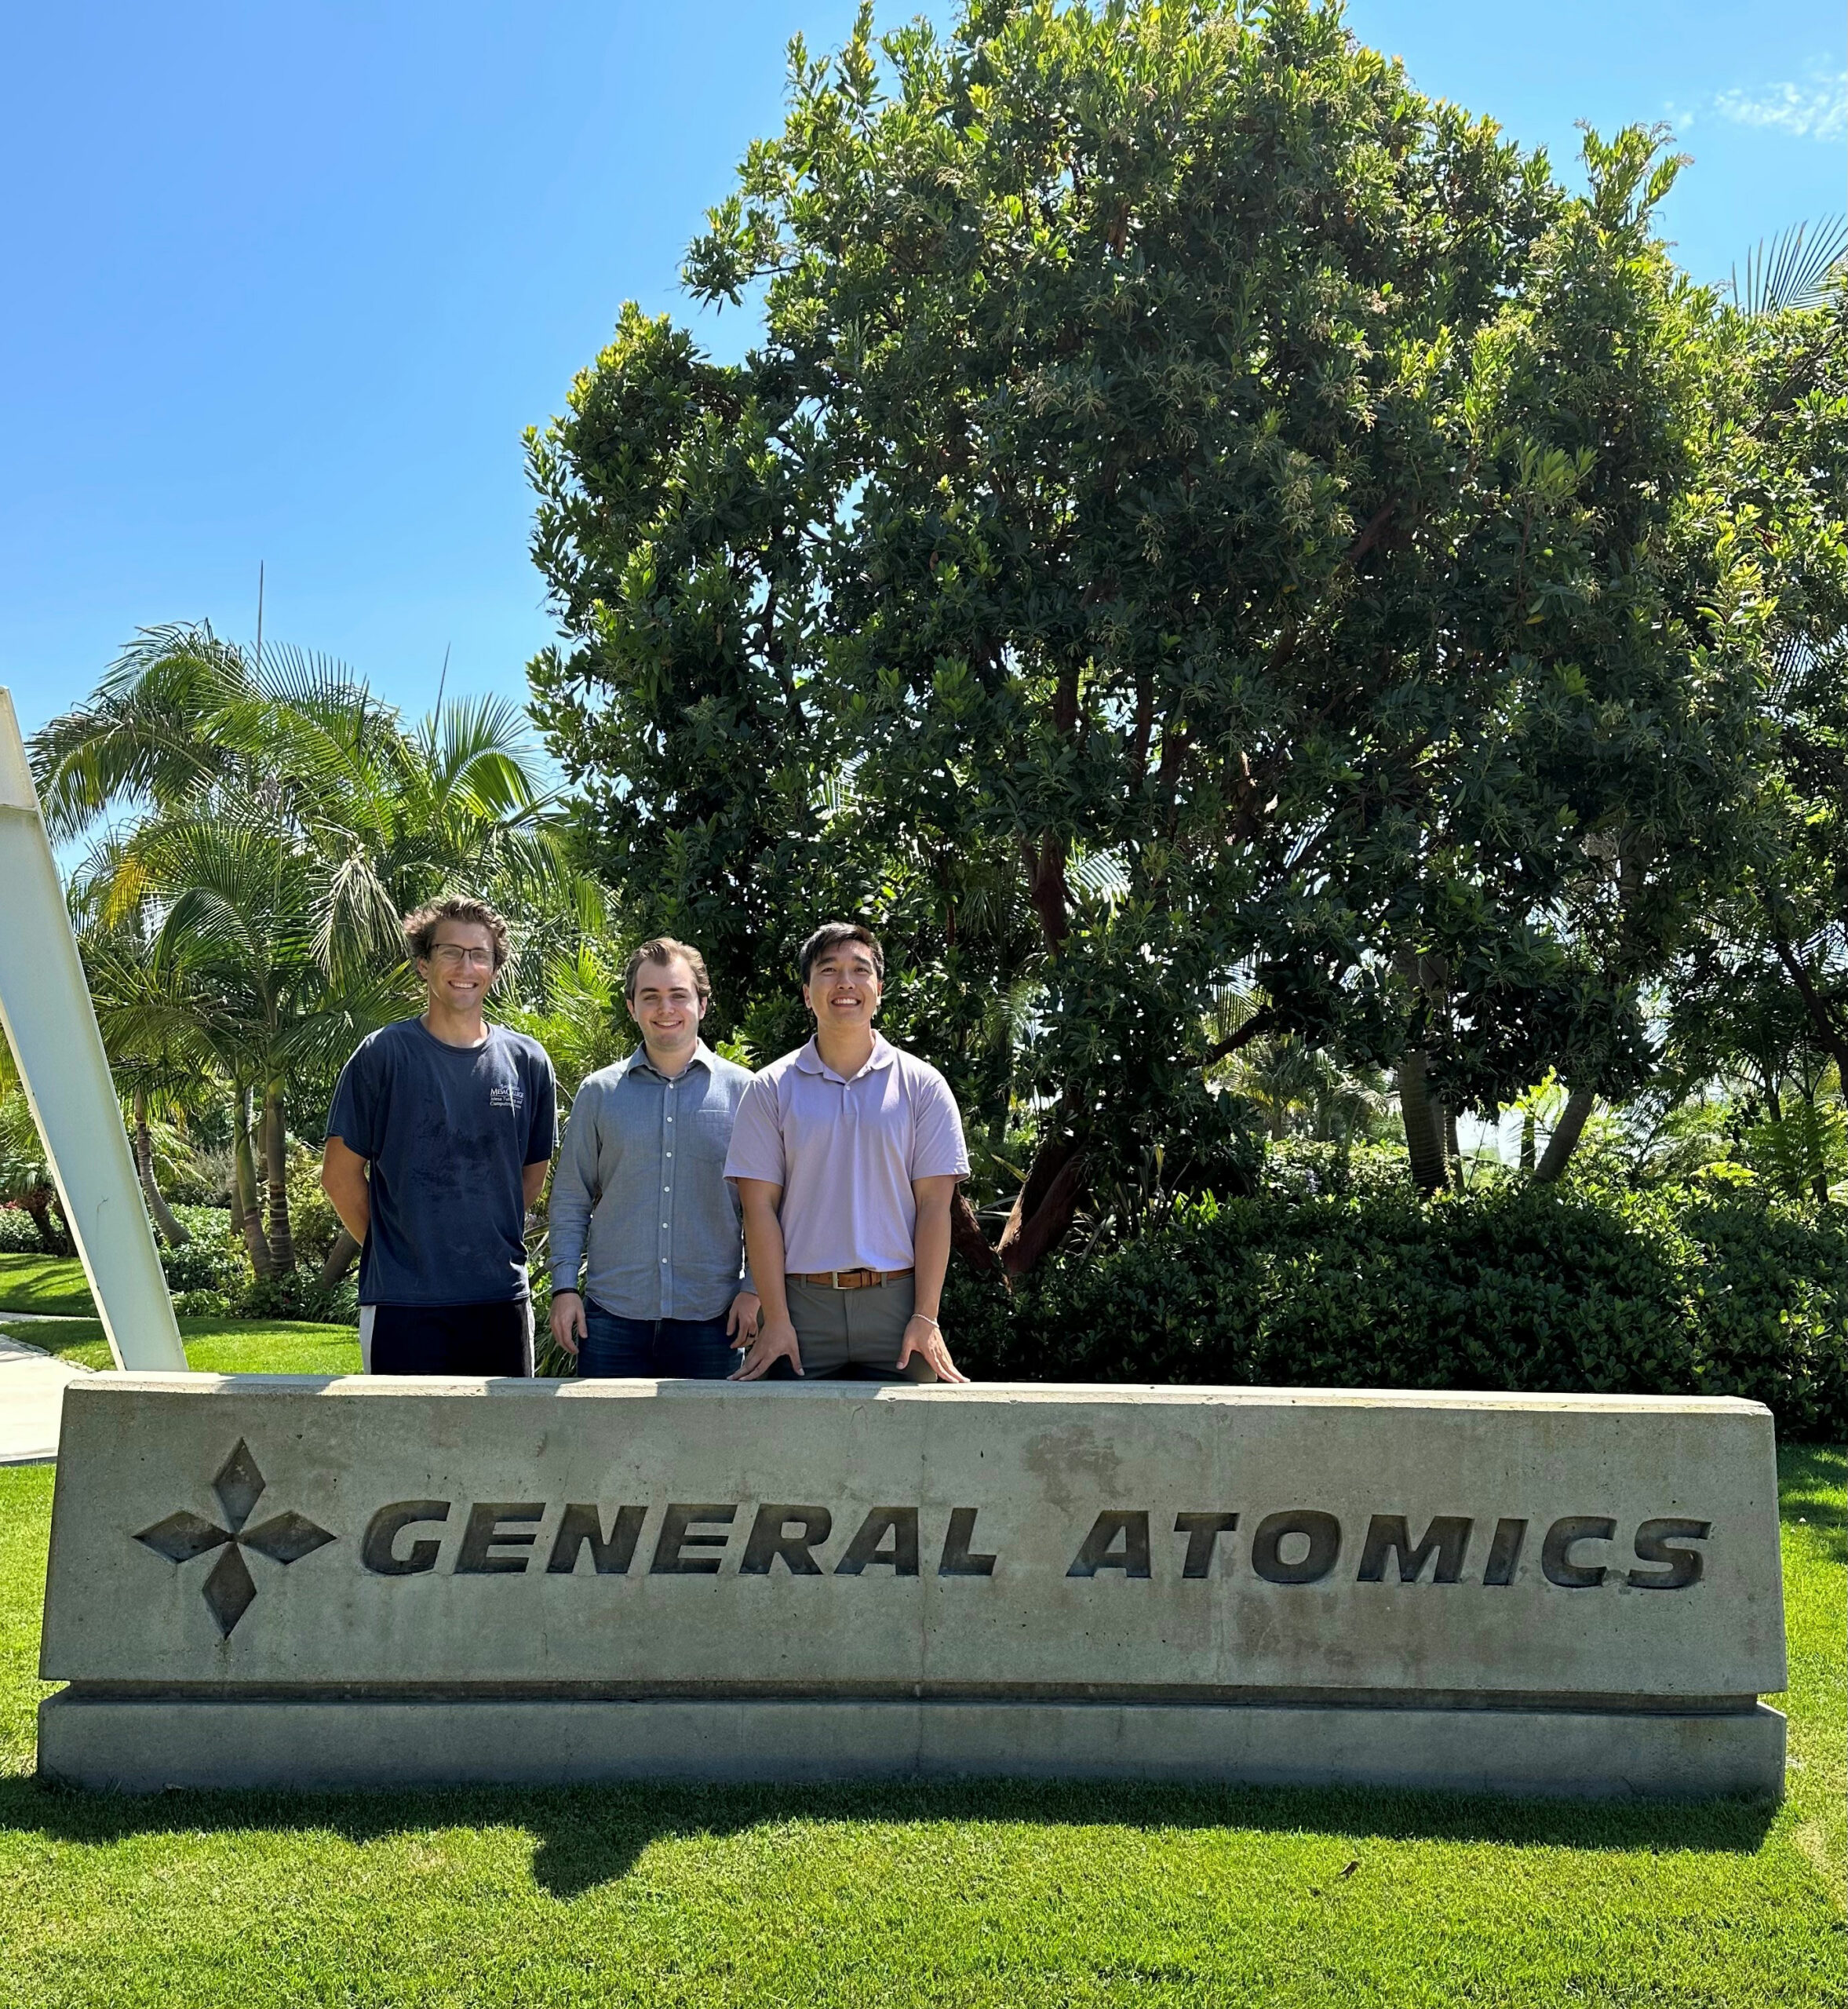 Three students stand behind a sign that reads "General Atomics"